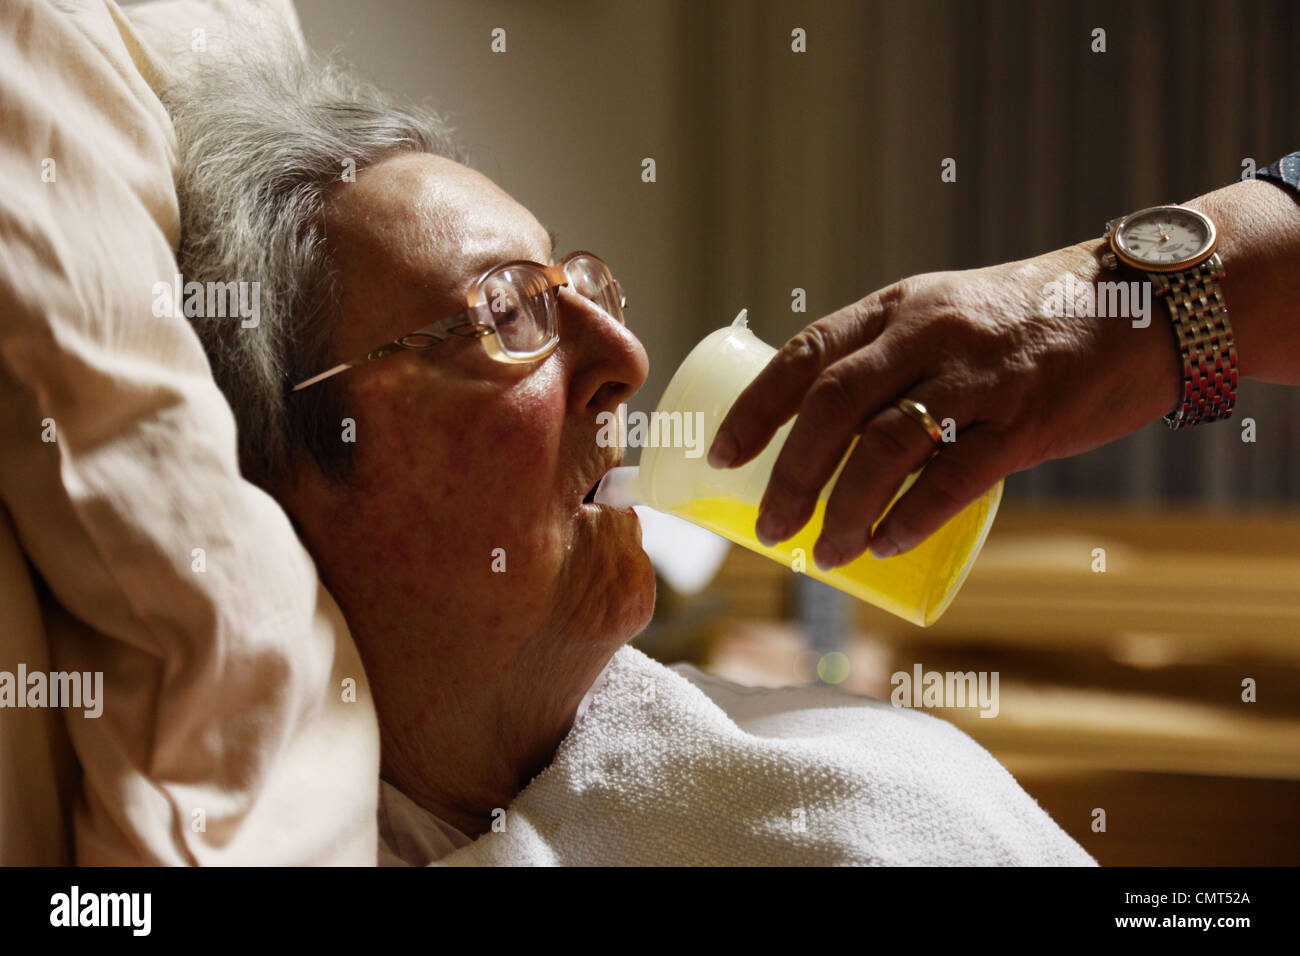 people, old age, retirement home, Altenzentrum der St. Clemens Hospitale in Sterkrade, older woman lies in a sickbed, aged 70 to 85 years, physical handicap, dementia illness, nurse holds a feeding cup and helps her to drink, Waltraut, Elke, D-Oberhausen, Stock Photo